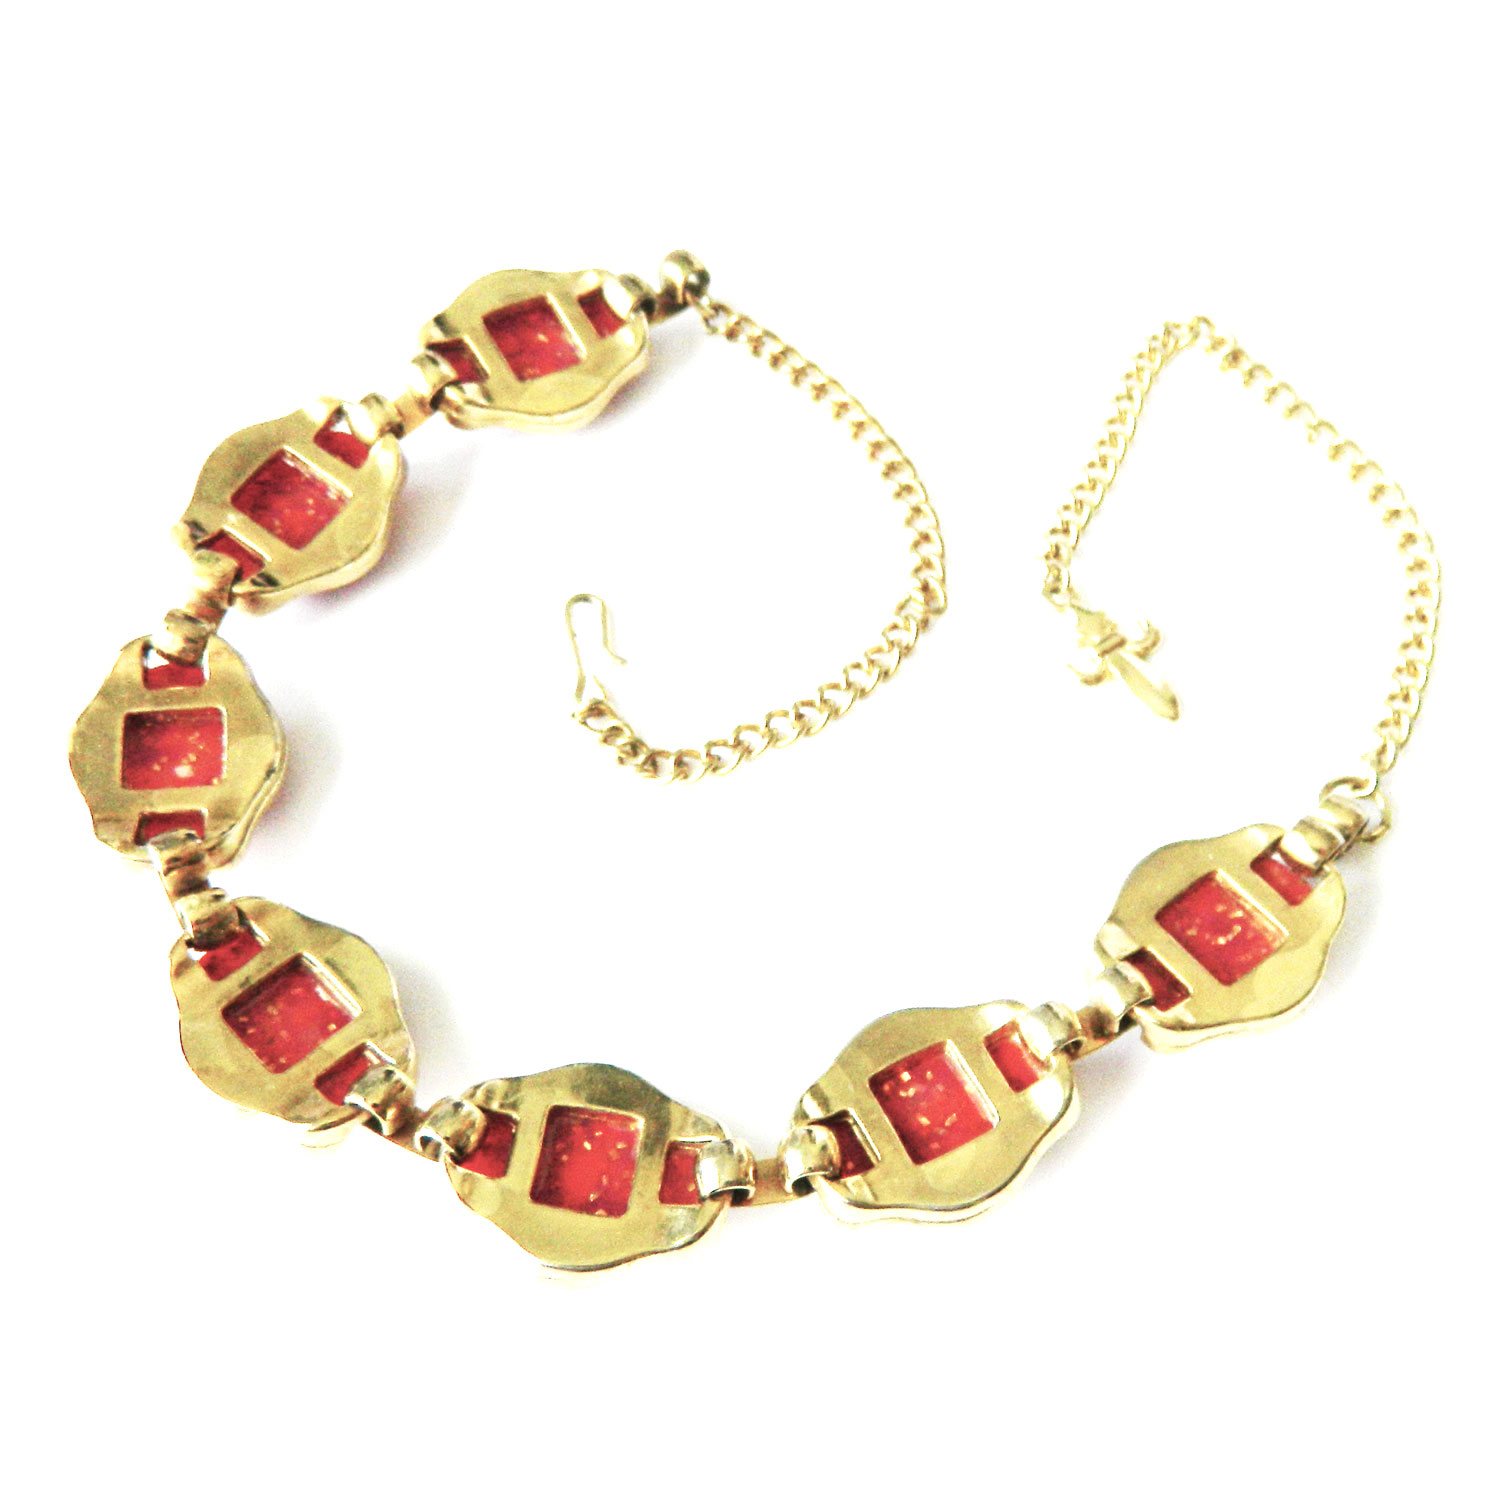 1950s thermoset necklace